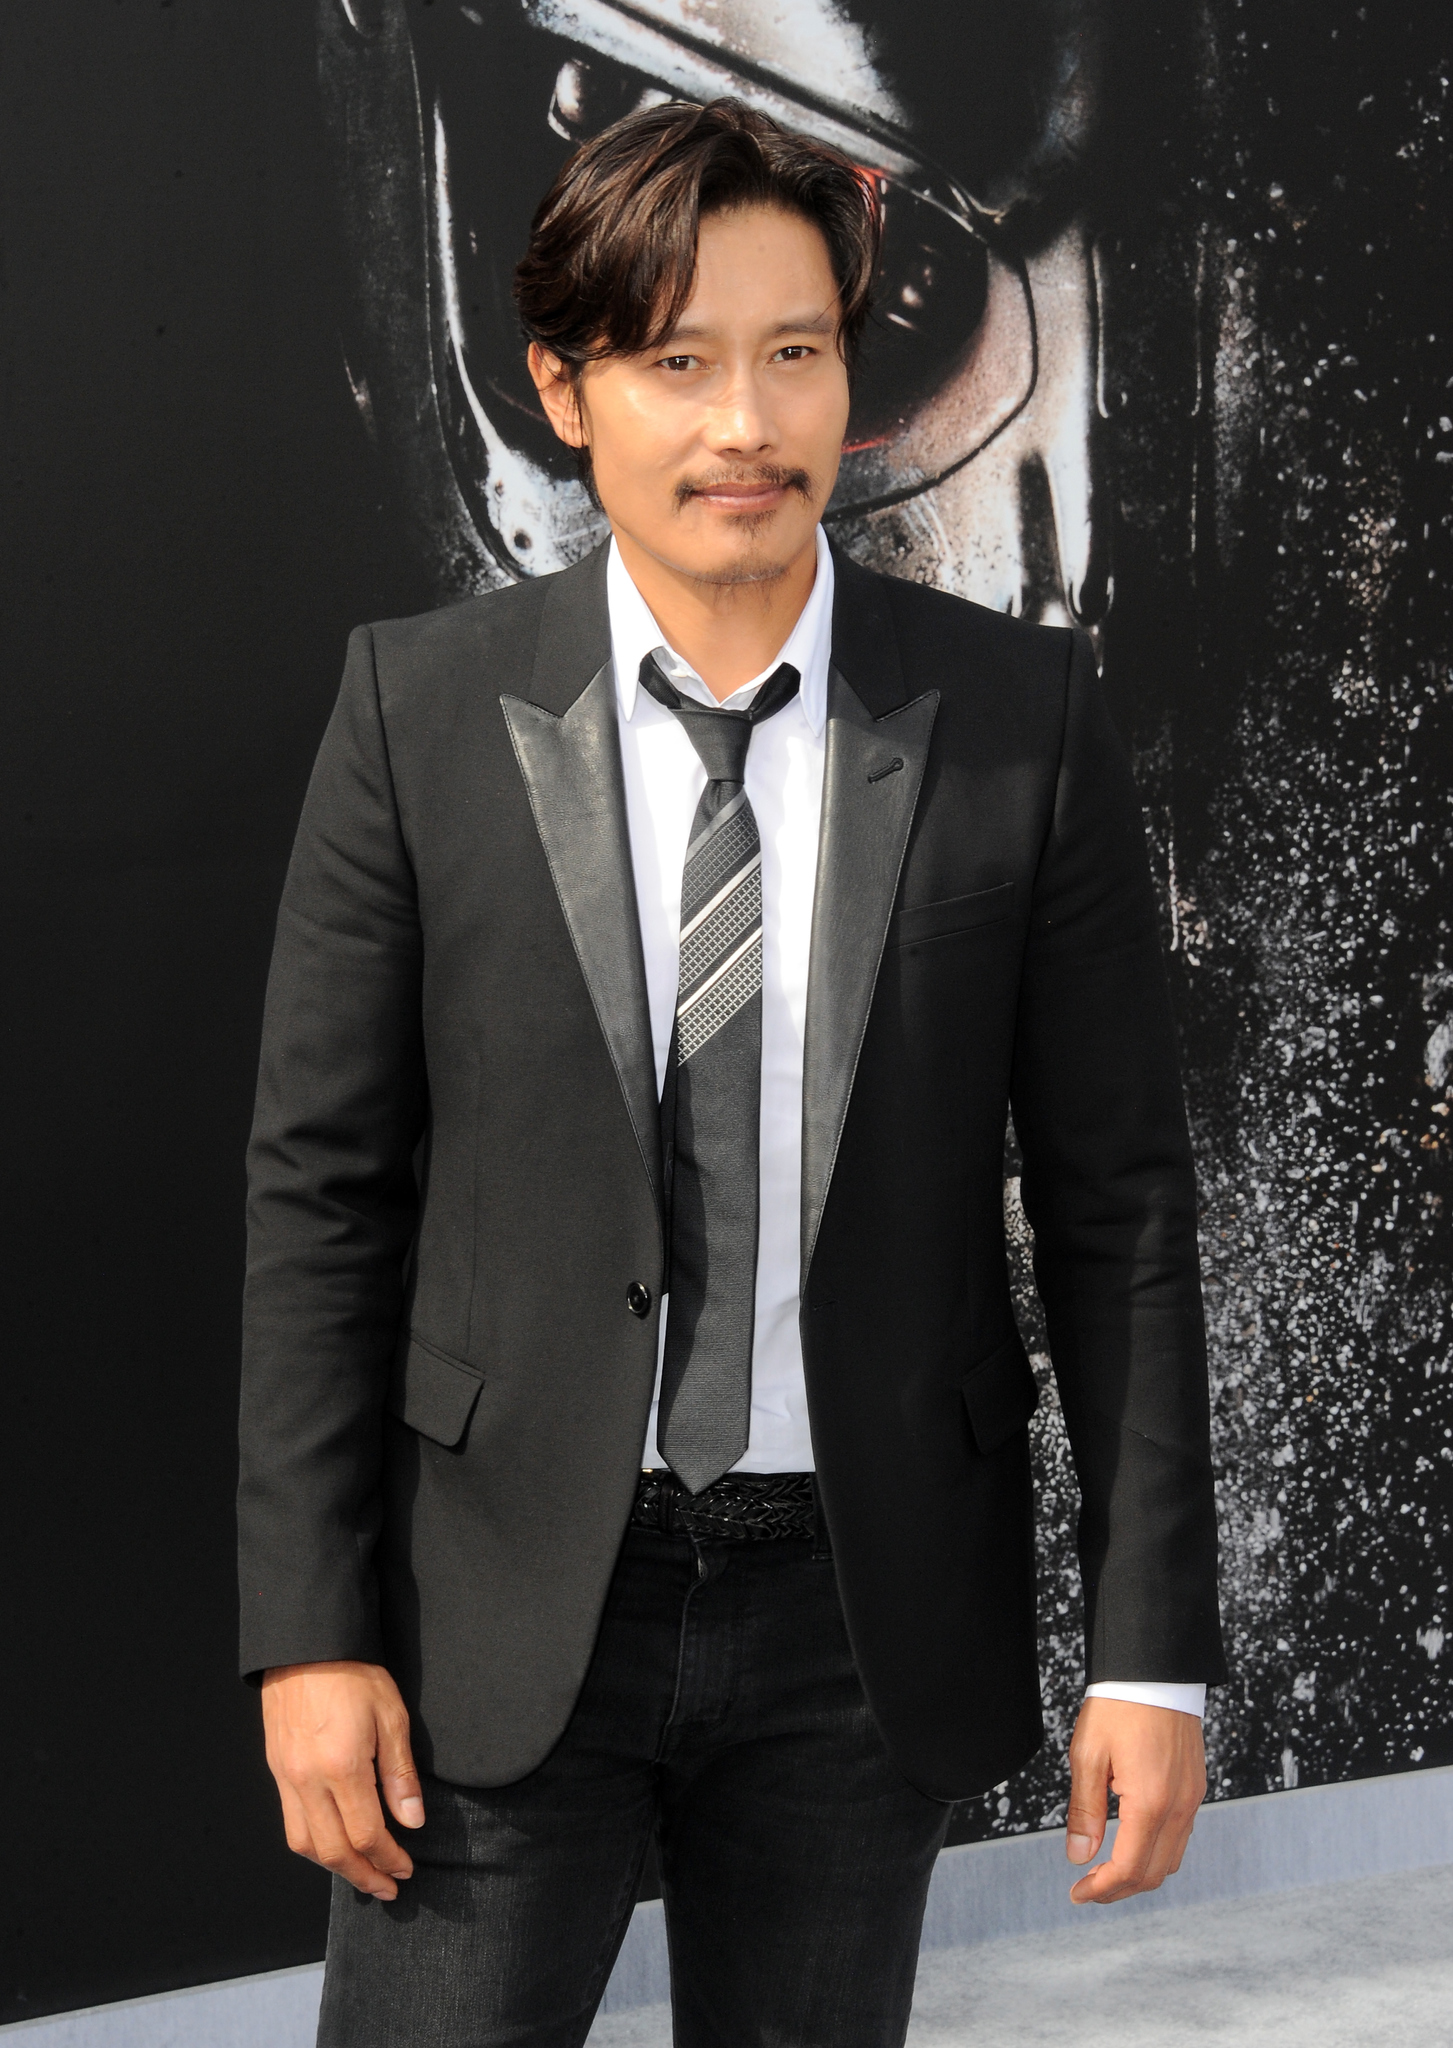 Byung-hun Lee at event of Terminator Genisys (2015)